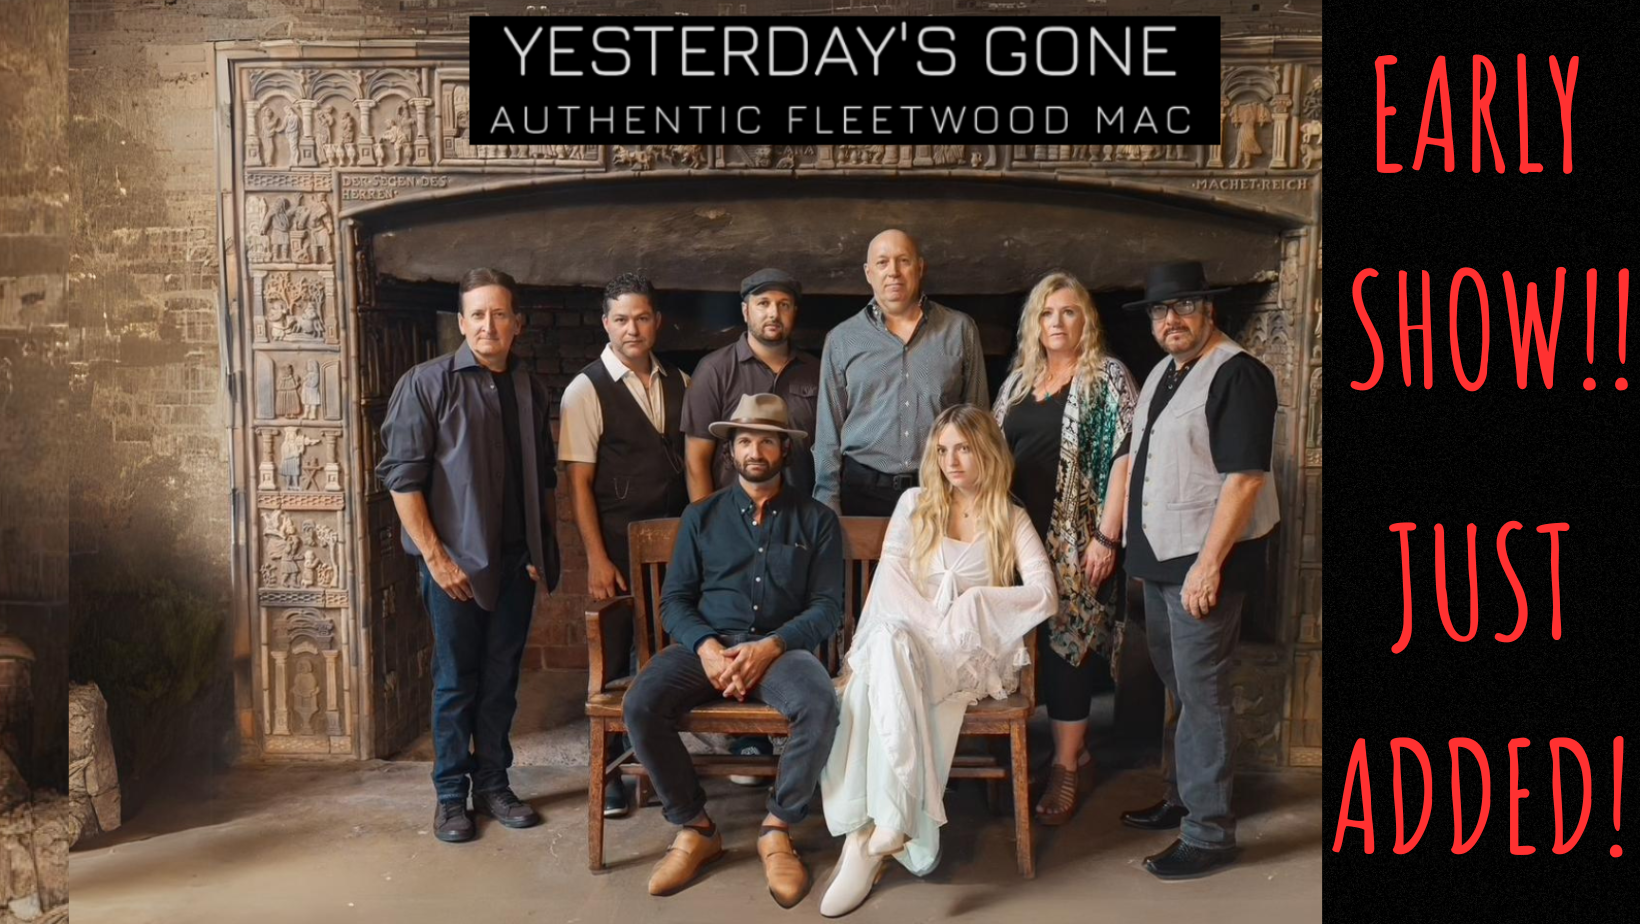 SAT. FEB. 24: Yesterday's Gone: Tribute To Fleetwood Mac (Early Show)